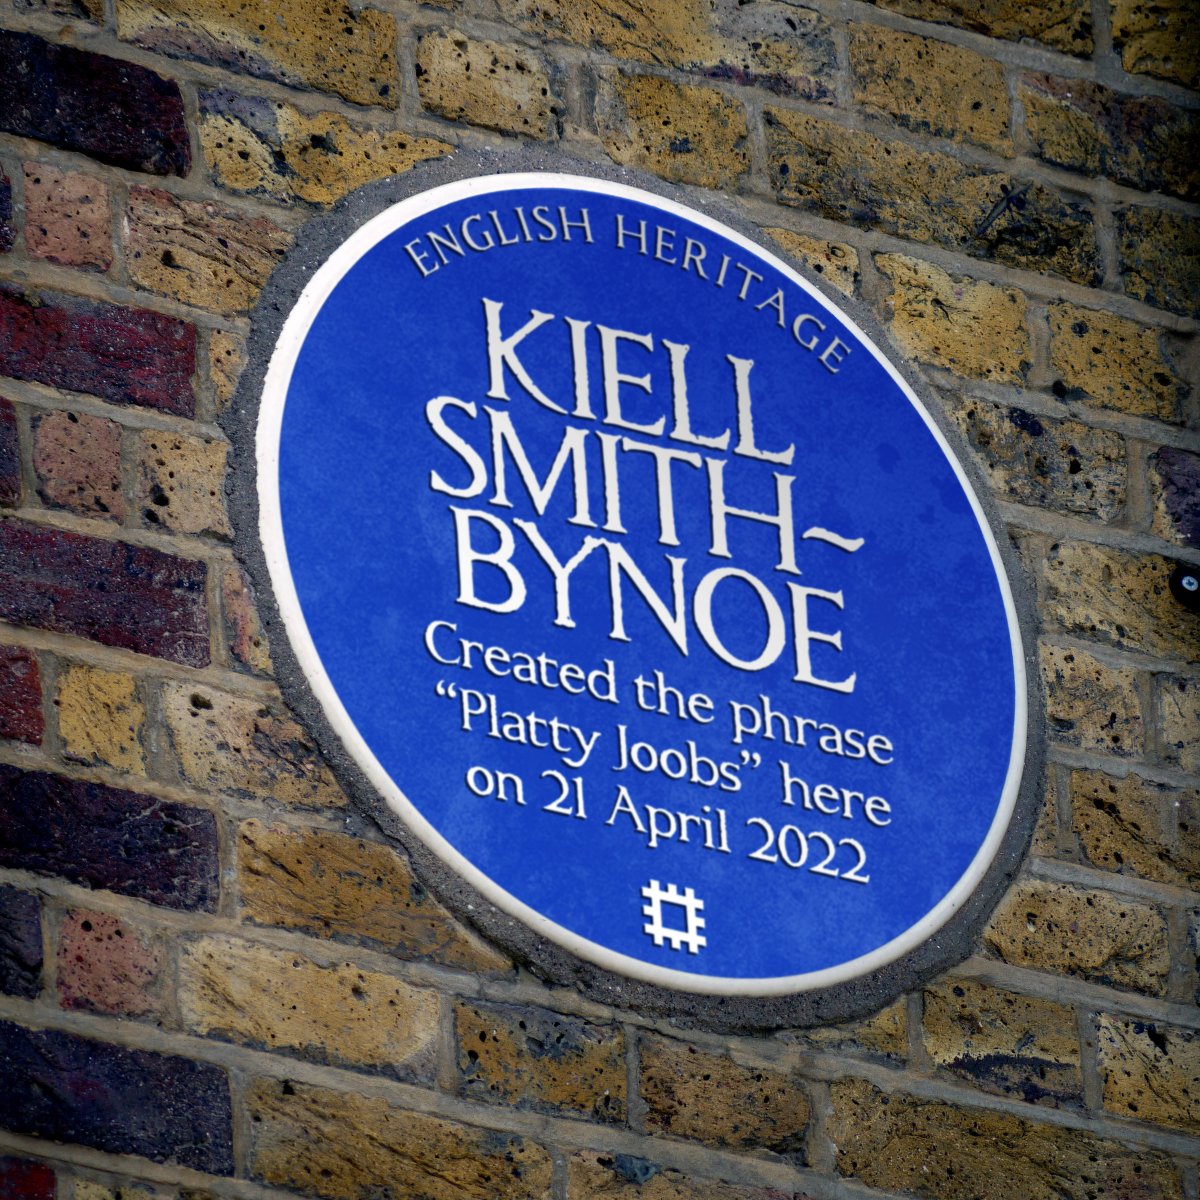 We all didn't independently come up with it.

One person did: Kiell Smith-Bynoe

#PlattyJoobs 

@kfRedhot #KiellSmithBynoe #EdGamble #JamesAcaster #OffMenuPodcast #NoContext #OffMenu